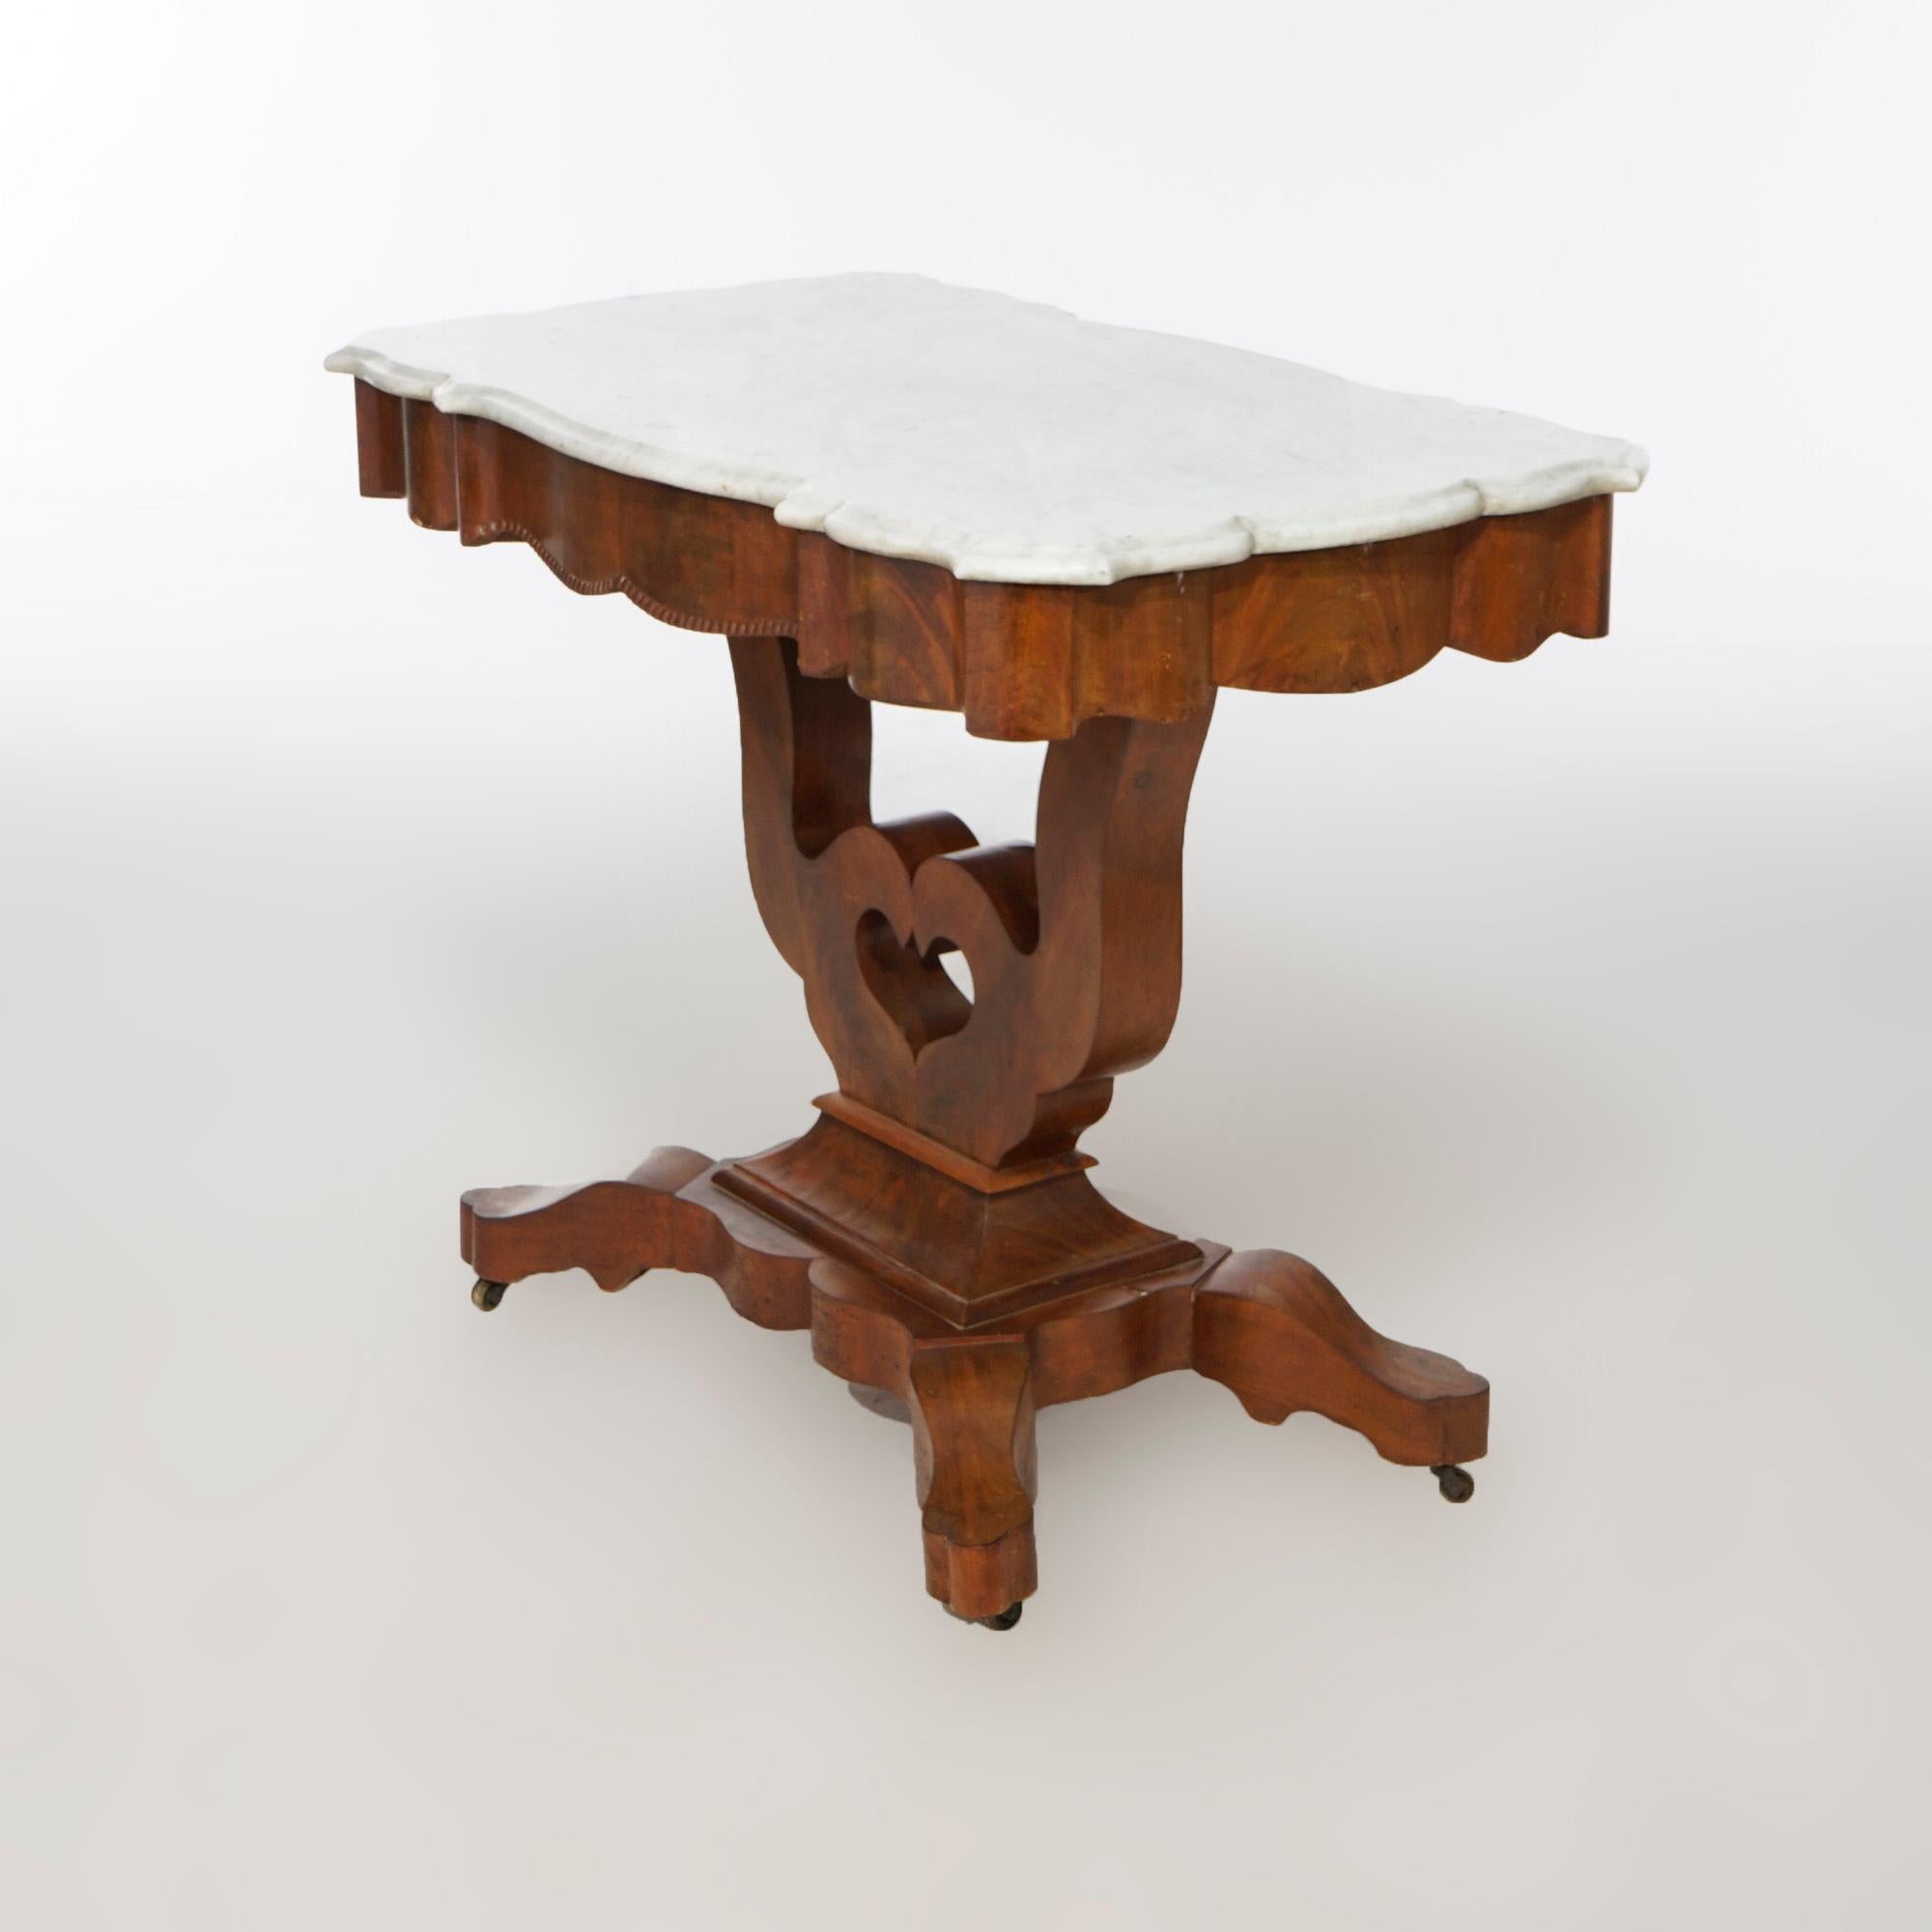 Antique Neoclassical Flame Mahogany & Marble Lyre Turtle Top Parlor Table c1880 In Good Condition For Sale In Big Flats, NY